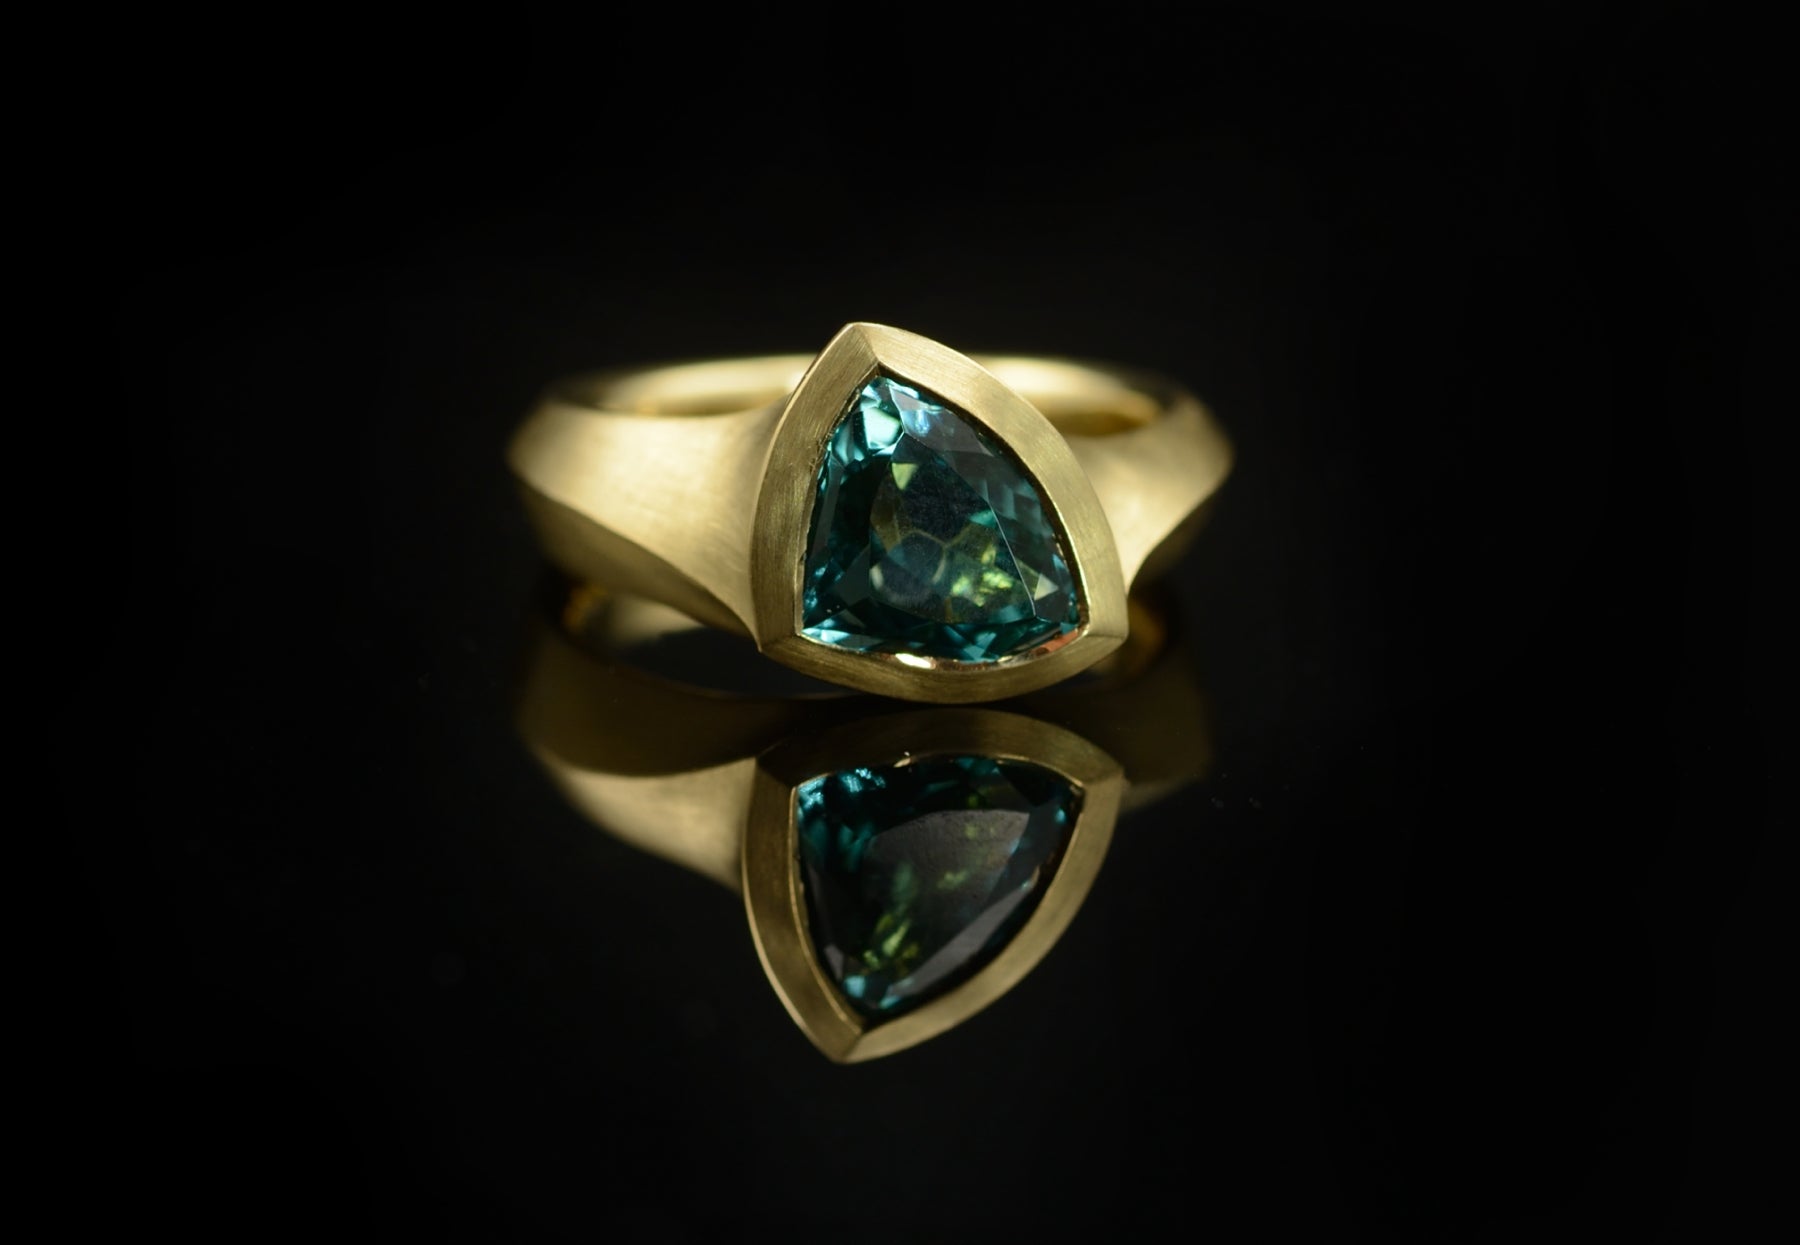 Hand carved yellow gold and trillion tourmaline engagement ring